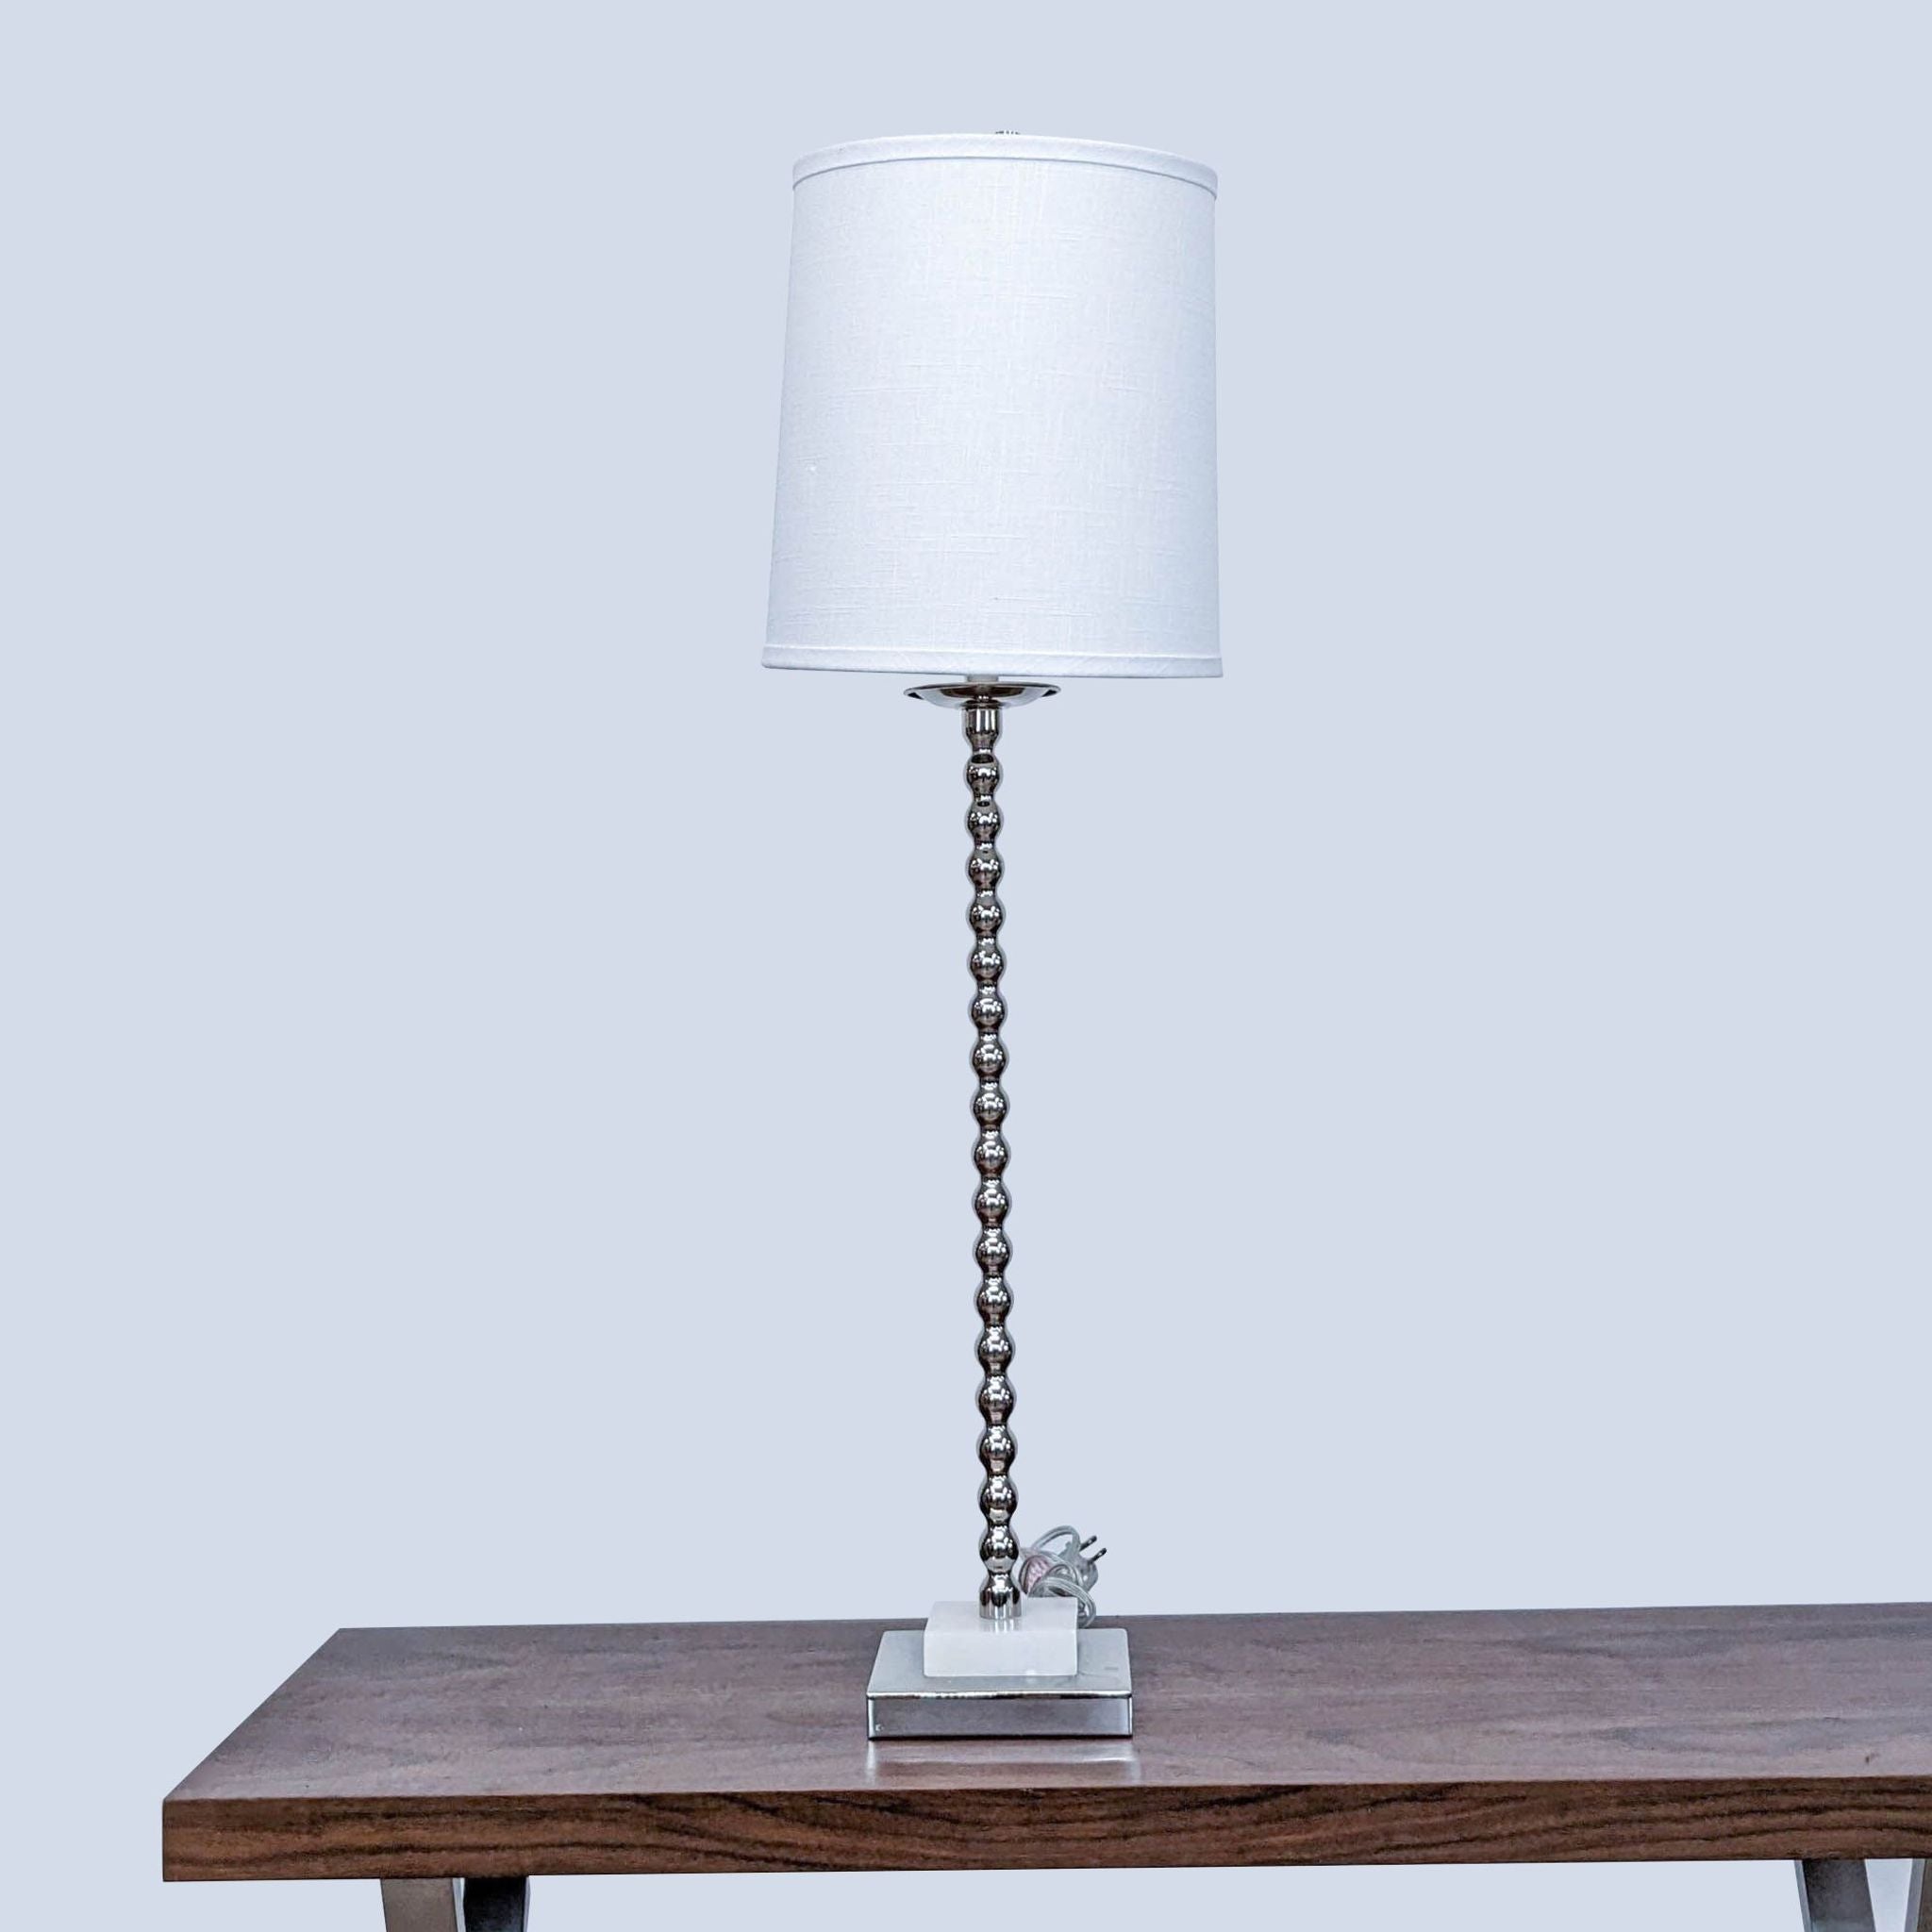 Reperch branded tabletop lamp with a white shade and spherical metal stem on a wooden surface.